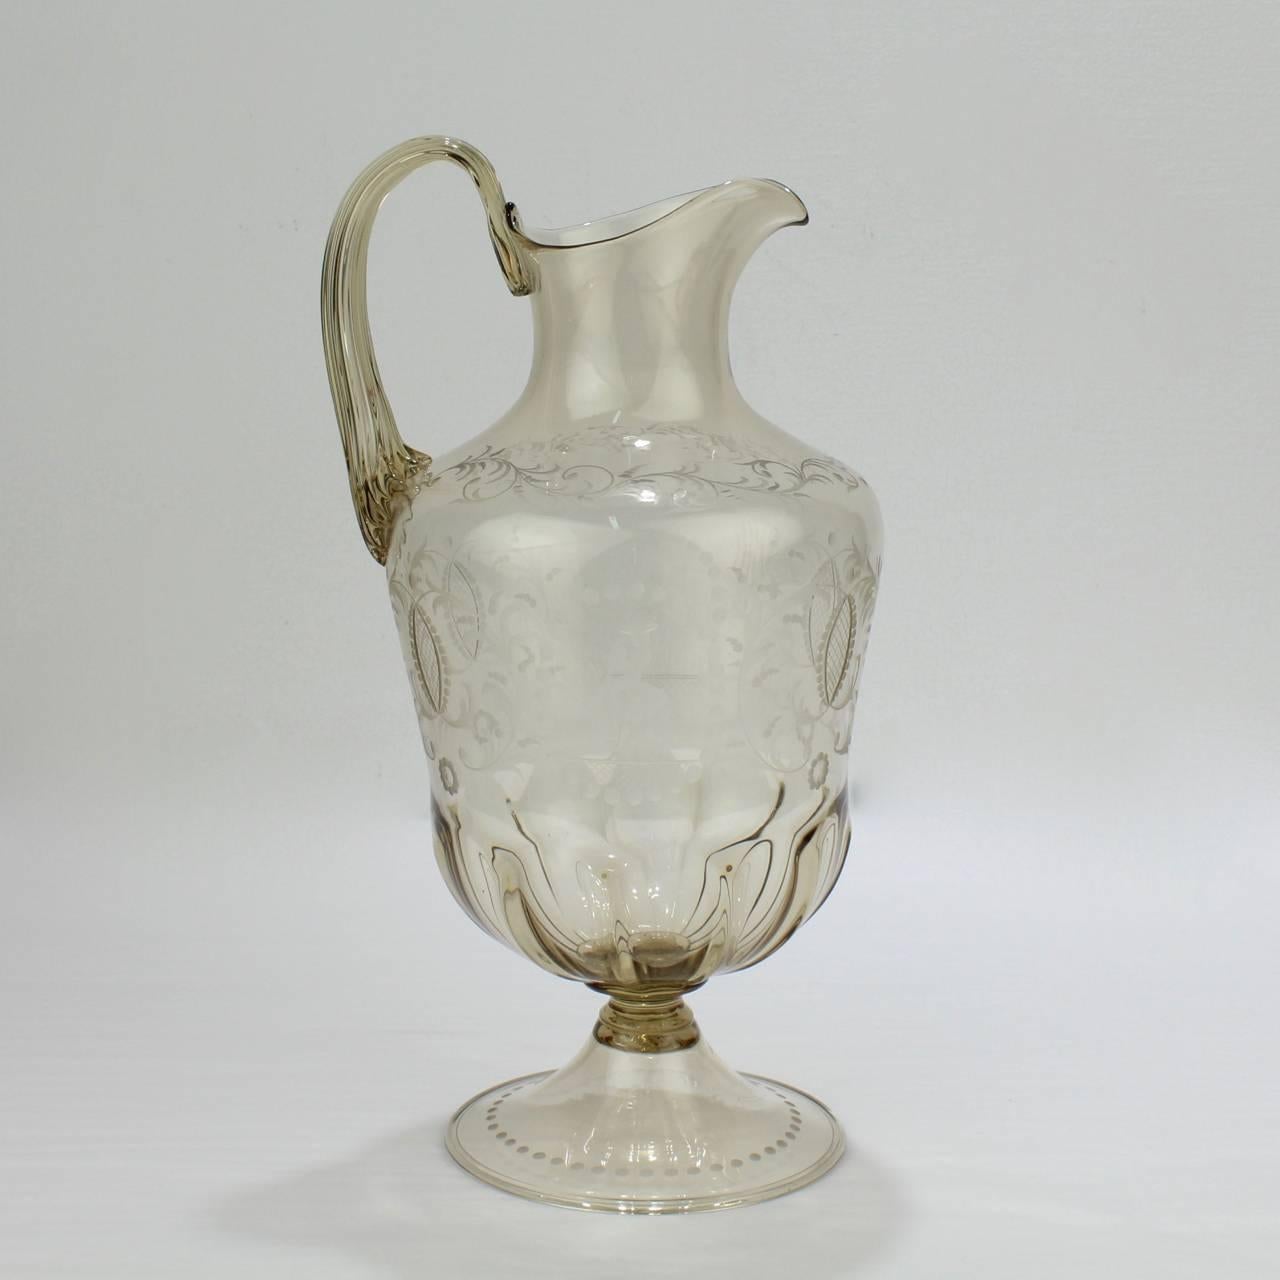 A good vintage Venetian glass wine ewer or water pitcher.

Manufactured by Pauly and Co. in Venice, Italy in a light amber blown glass with an applied handle and a central body with Renaissance style etching resting on a trumpet-form foot.

A rare